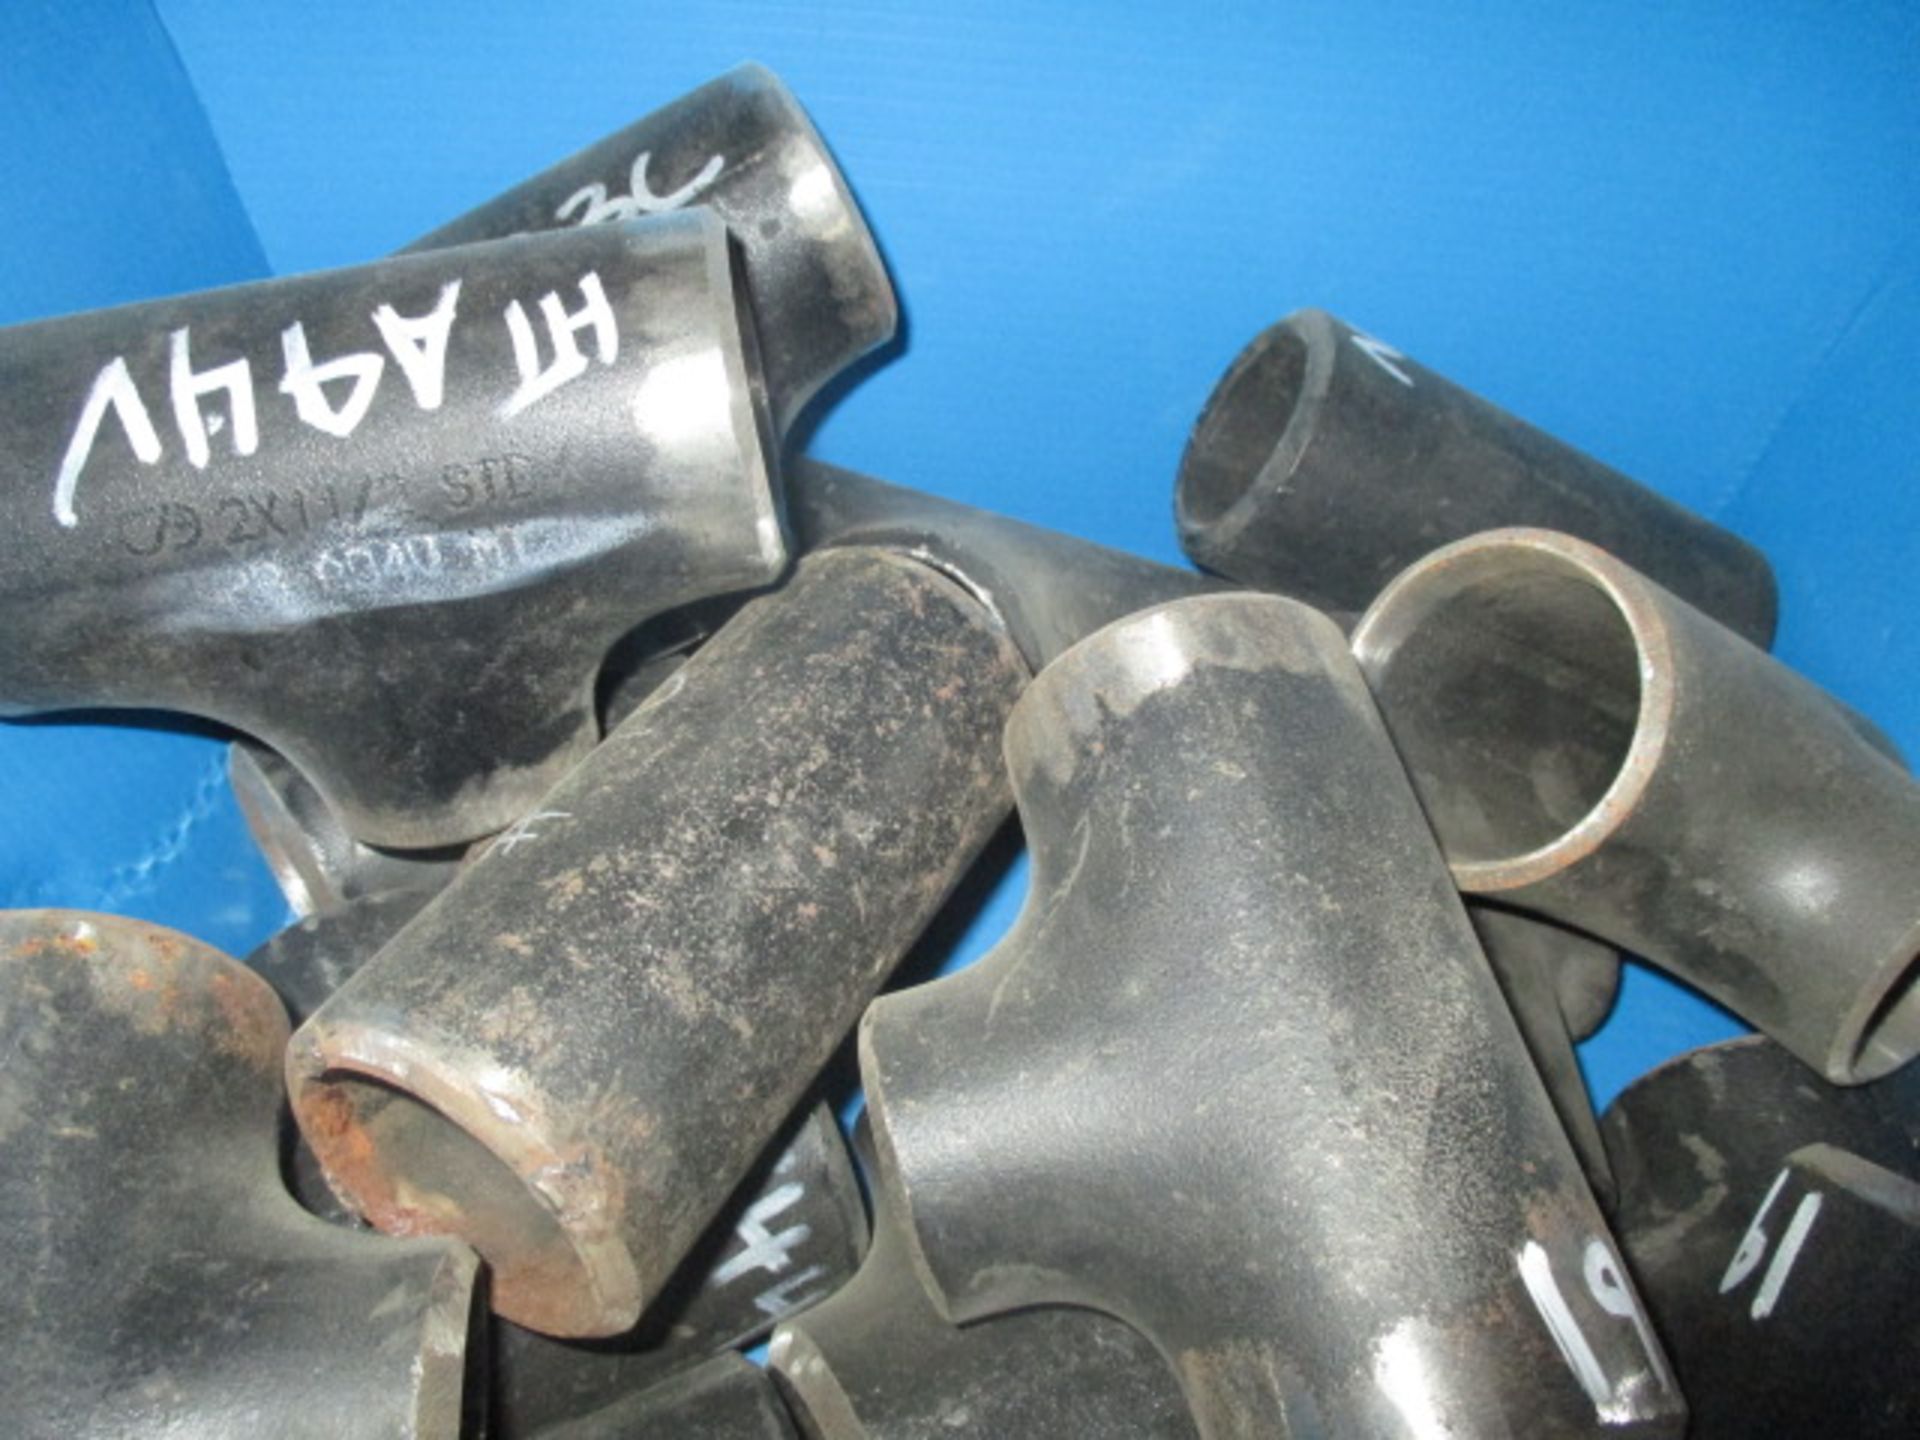 Skid lot of 6 Totes of Various Pipe Fittings - Image 2 of 6